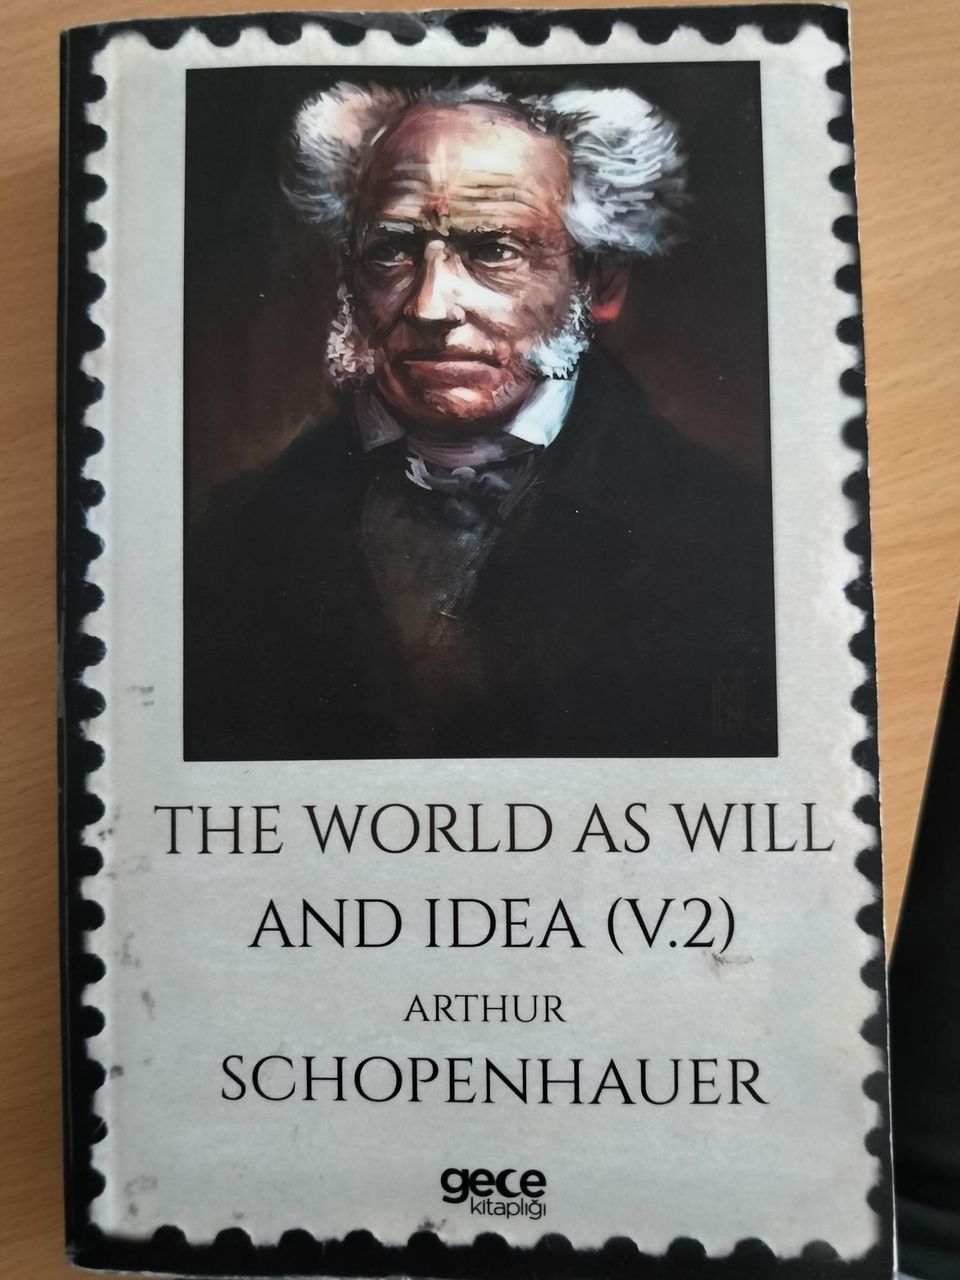 The World as Will and Idea (v. 2) by Arthur Schopenhauer